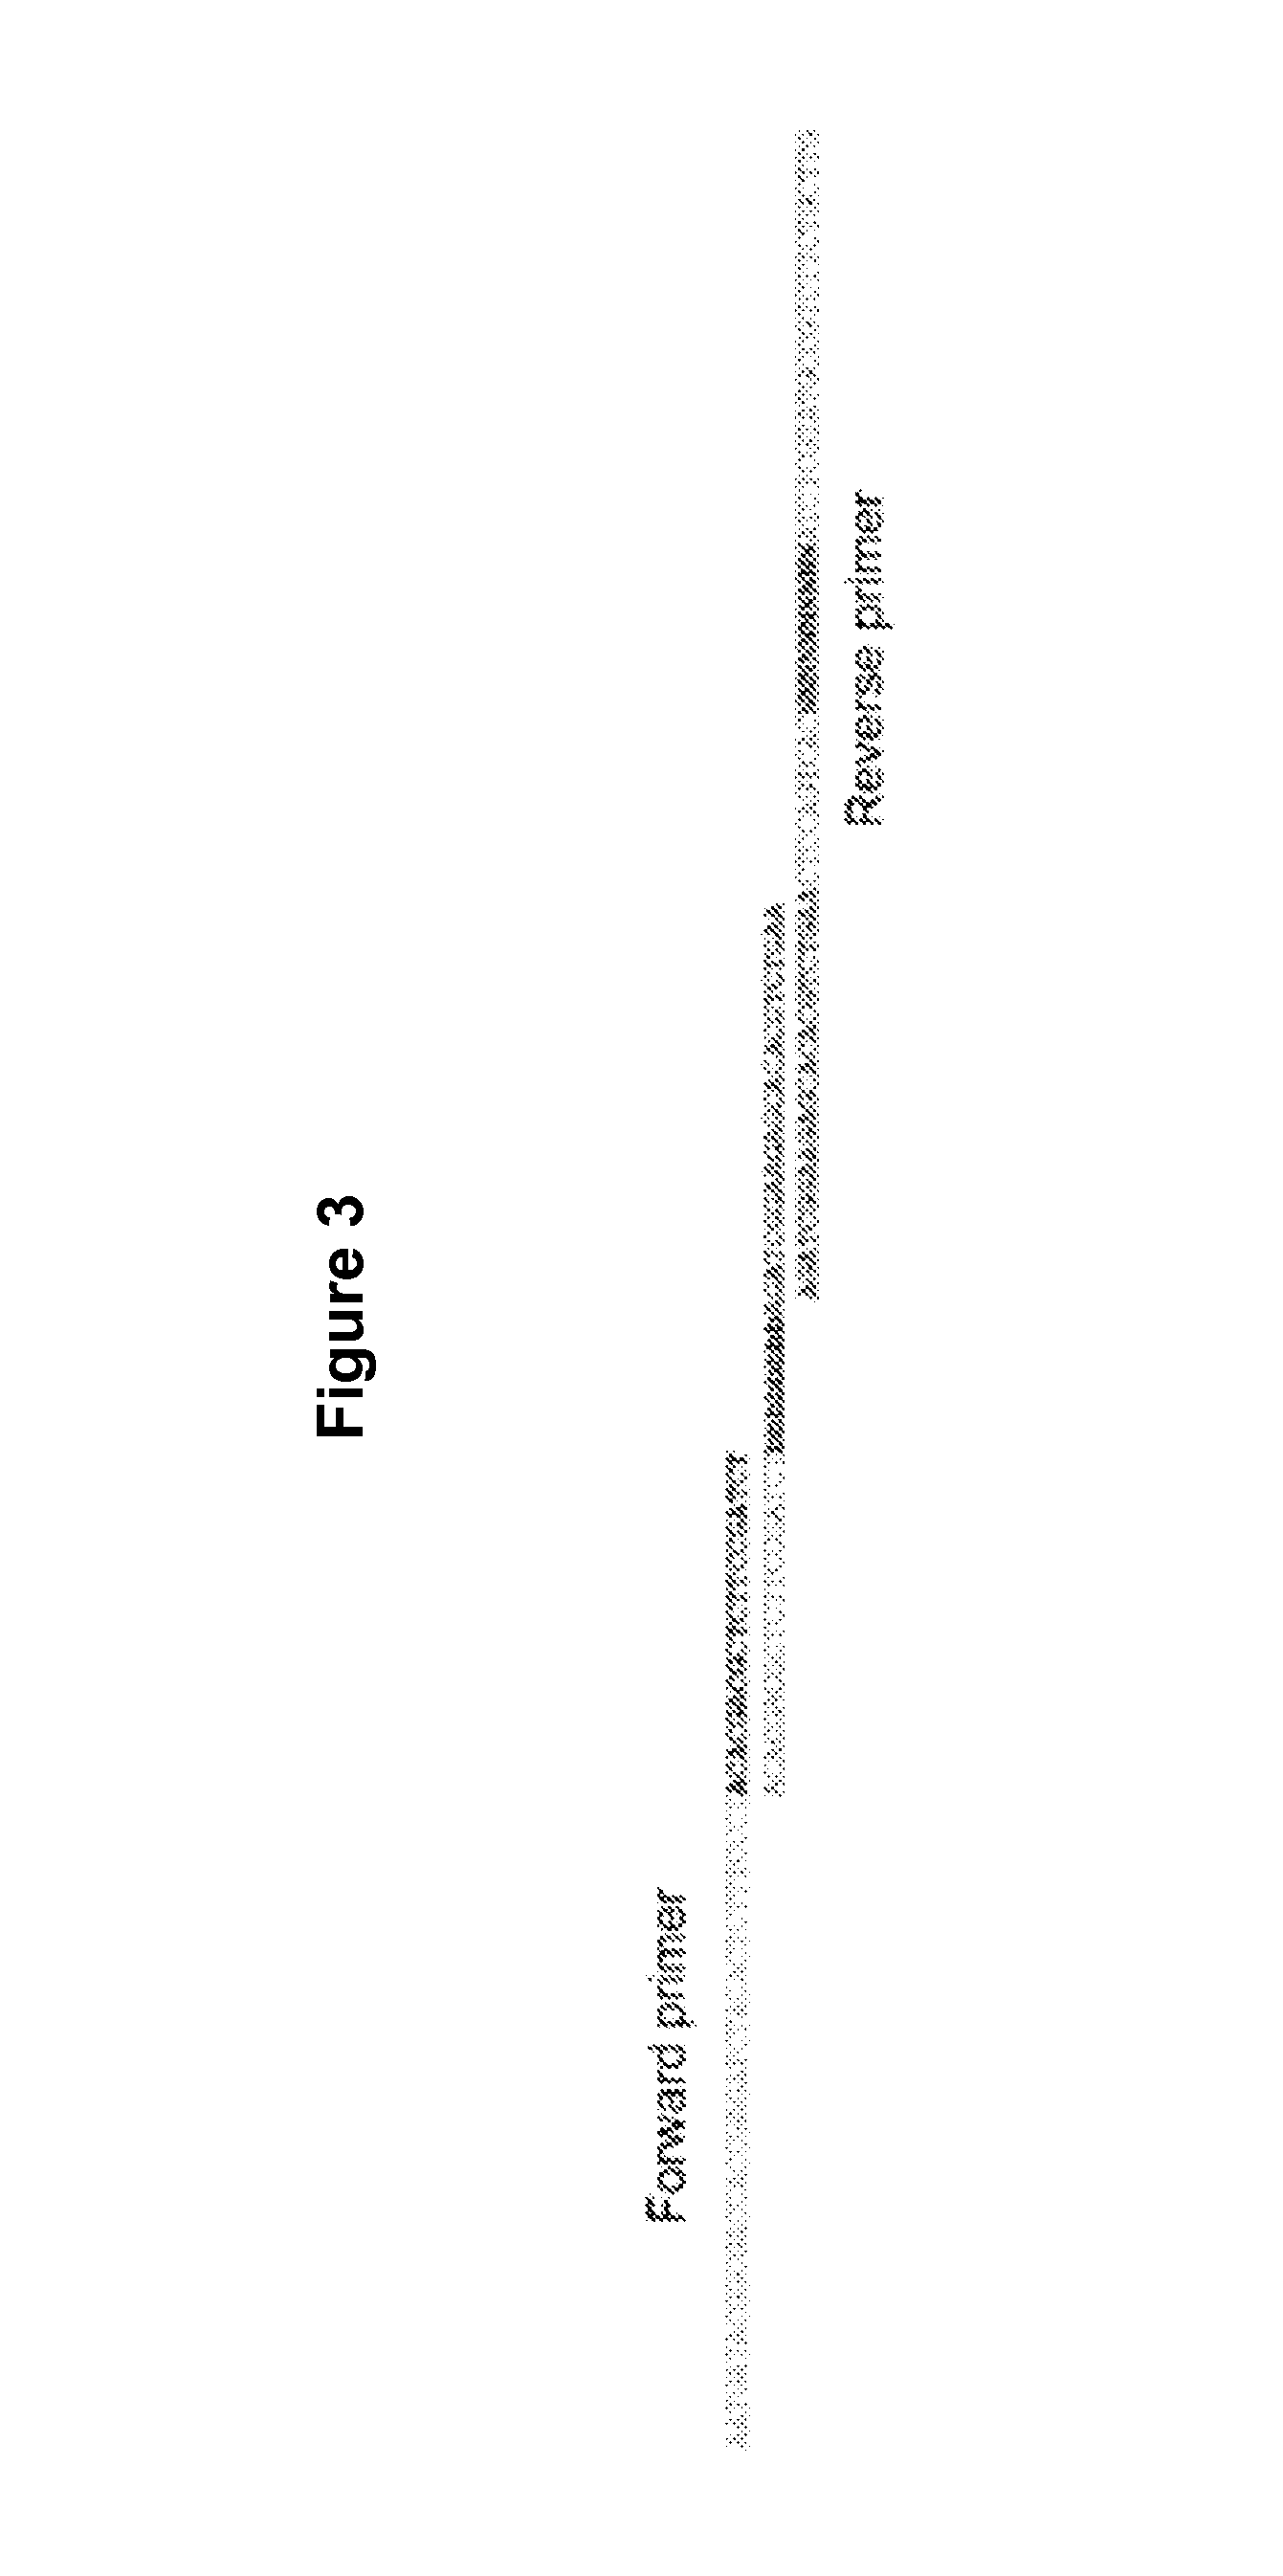 Methods of tagging particles for multiplexed functional screening